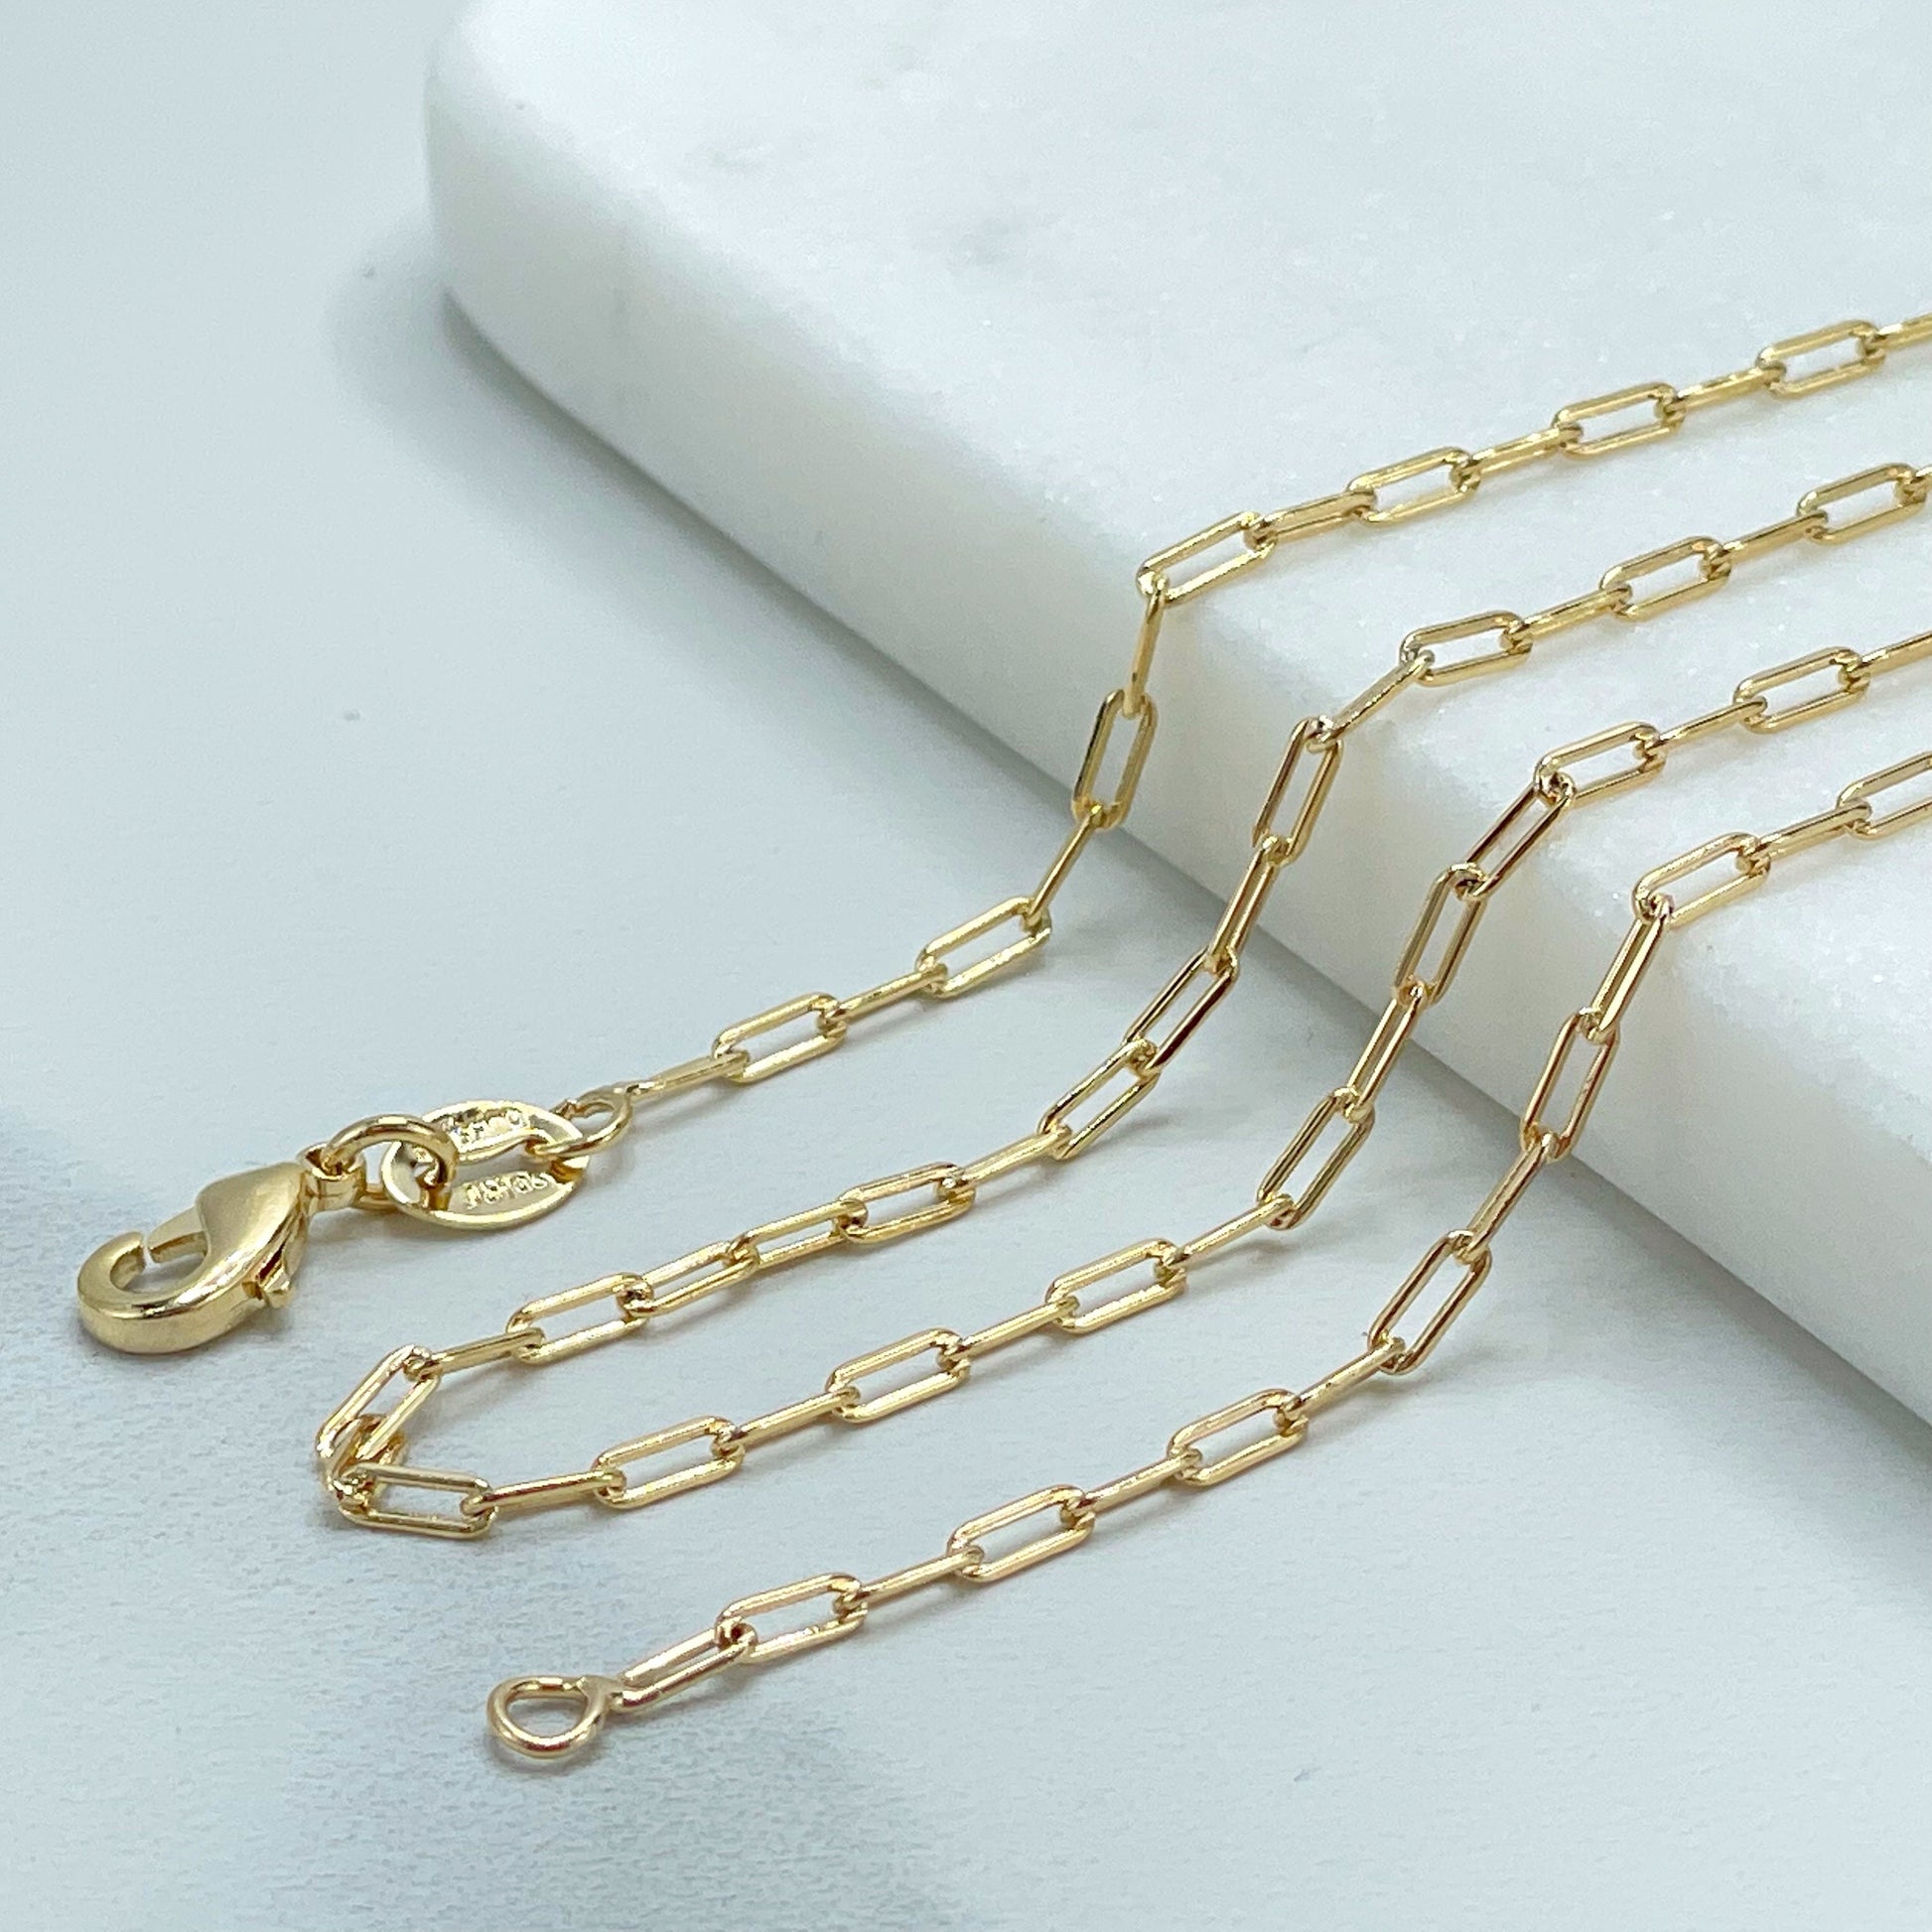 18k Gold Filled 2mm Paperclip Link Chain 18 inches Necklace Wholesale Jewelry Supplies